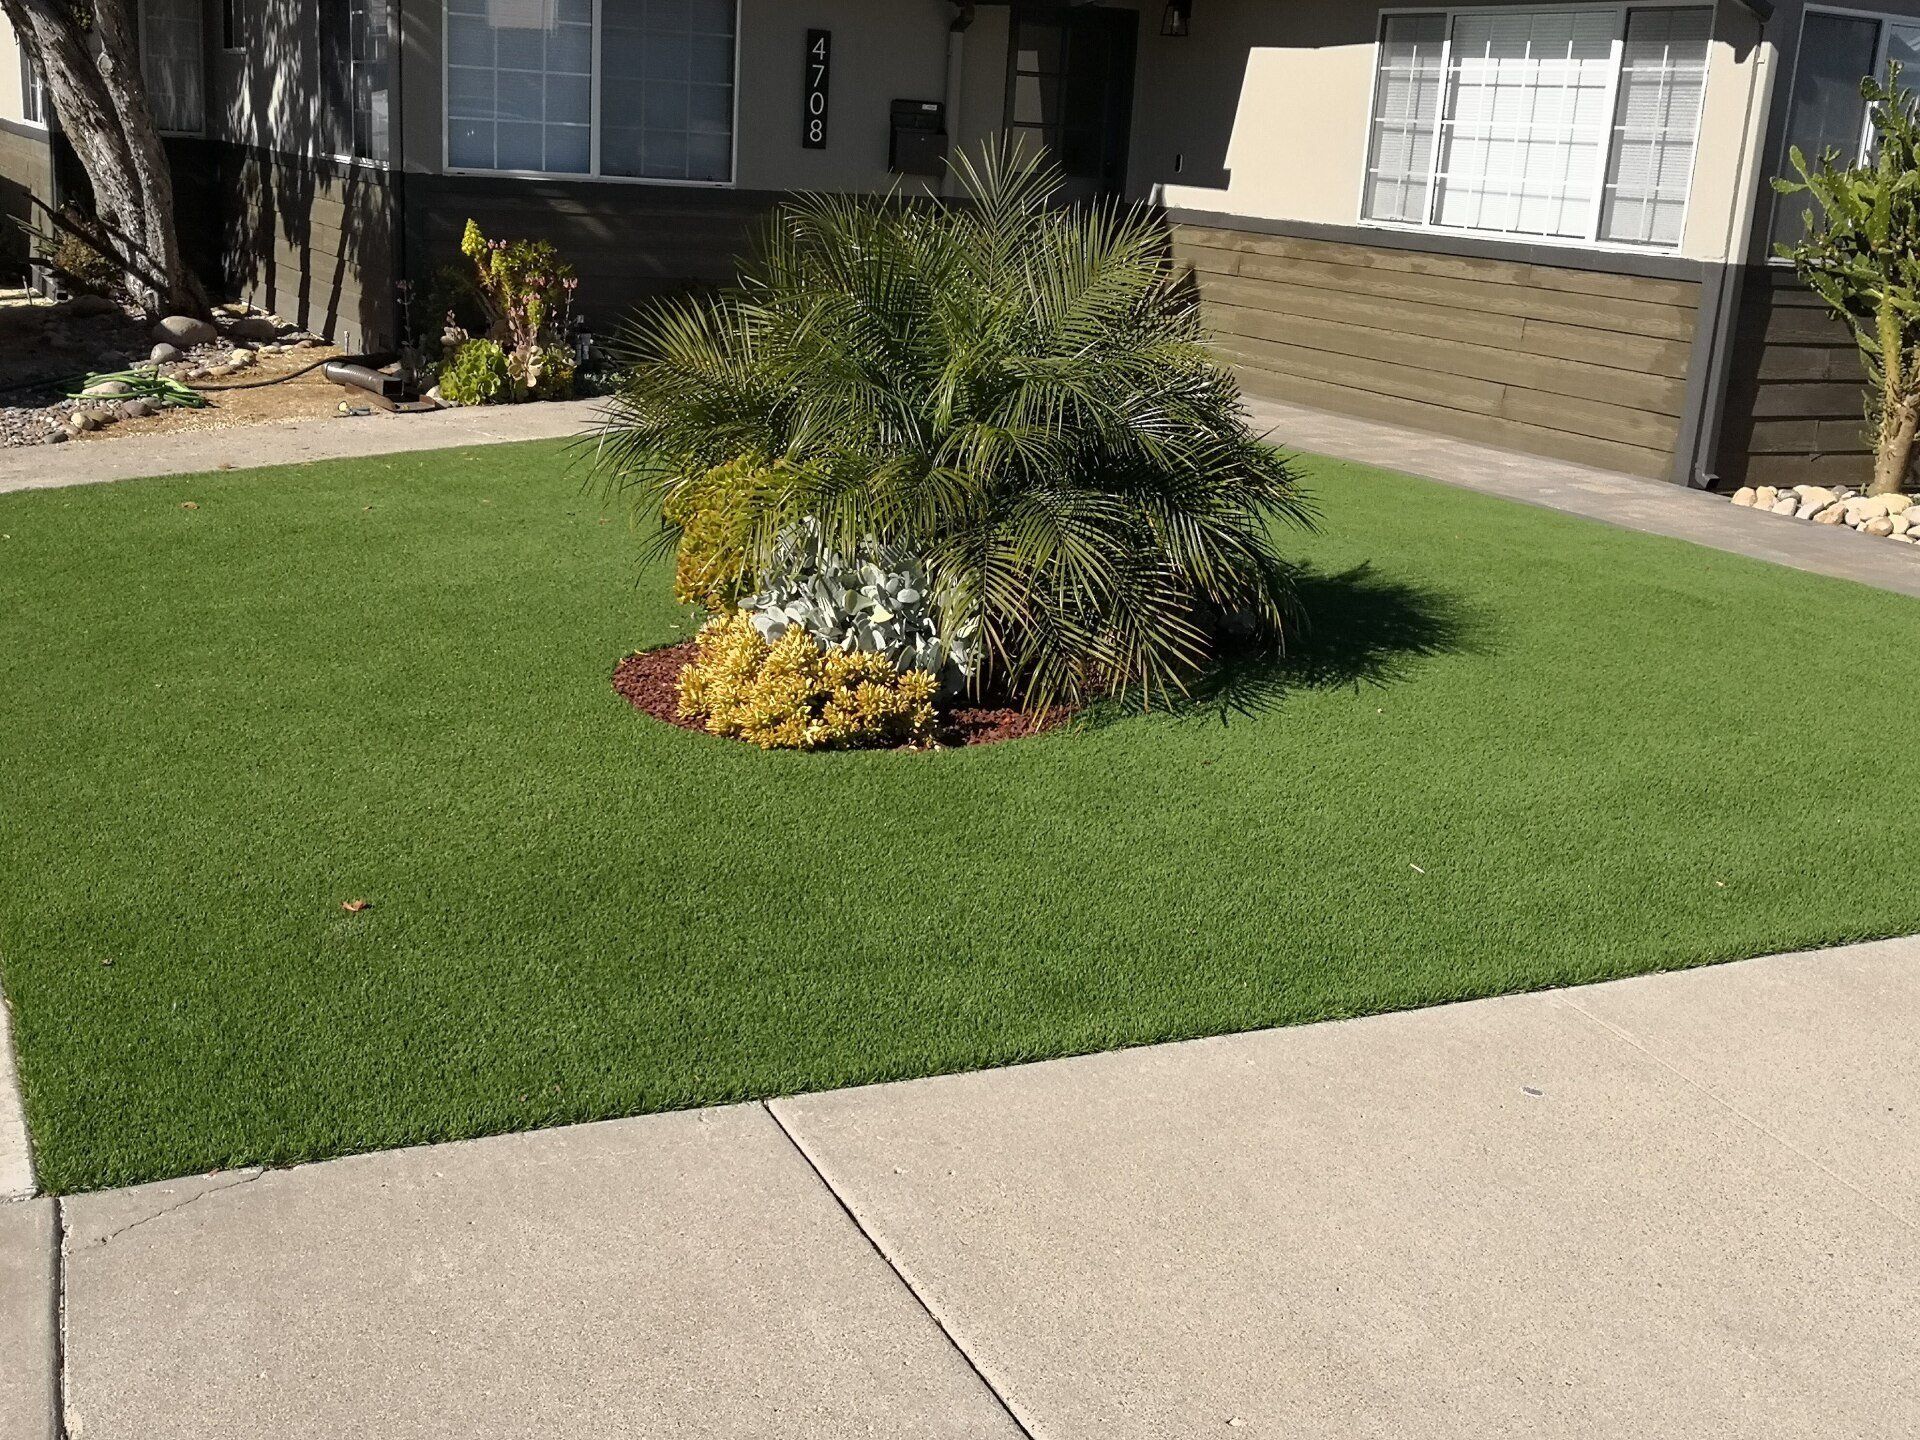 artificial lawn installed by Gilbert Artificial Turf and Green pros around a pygmy date palm